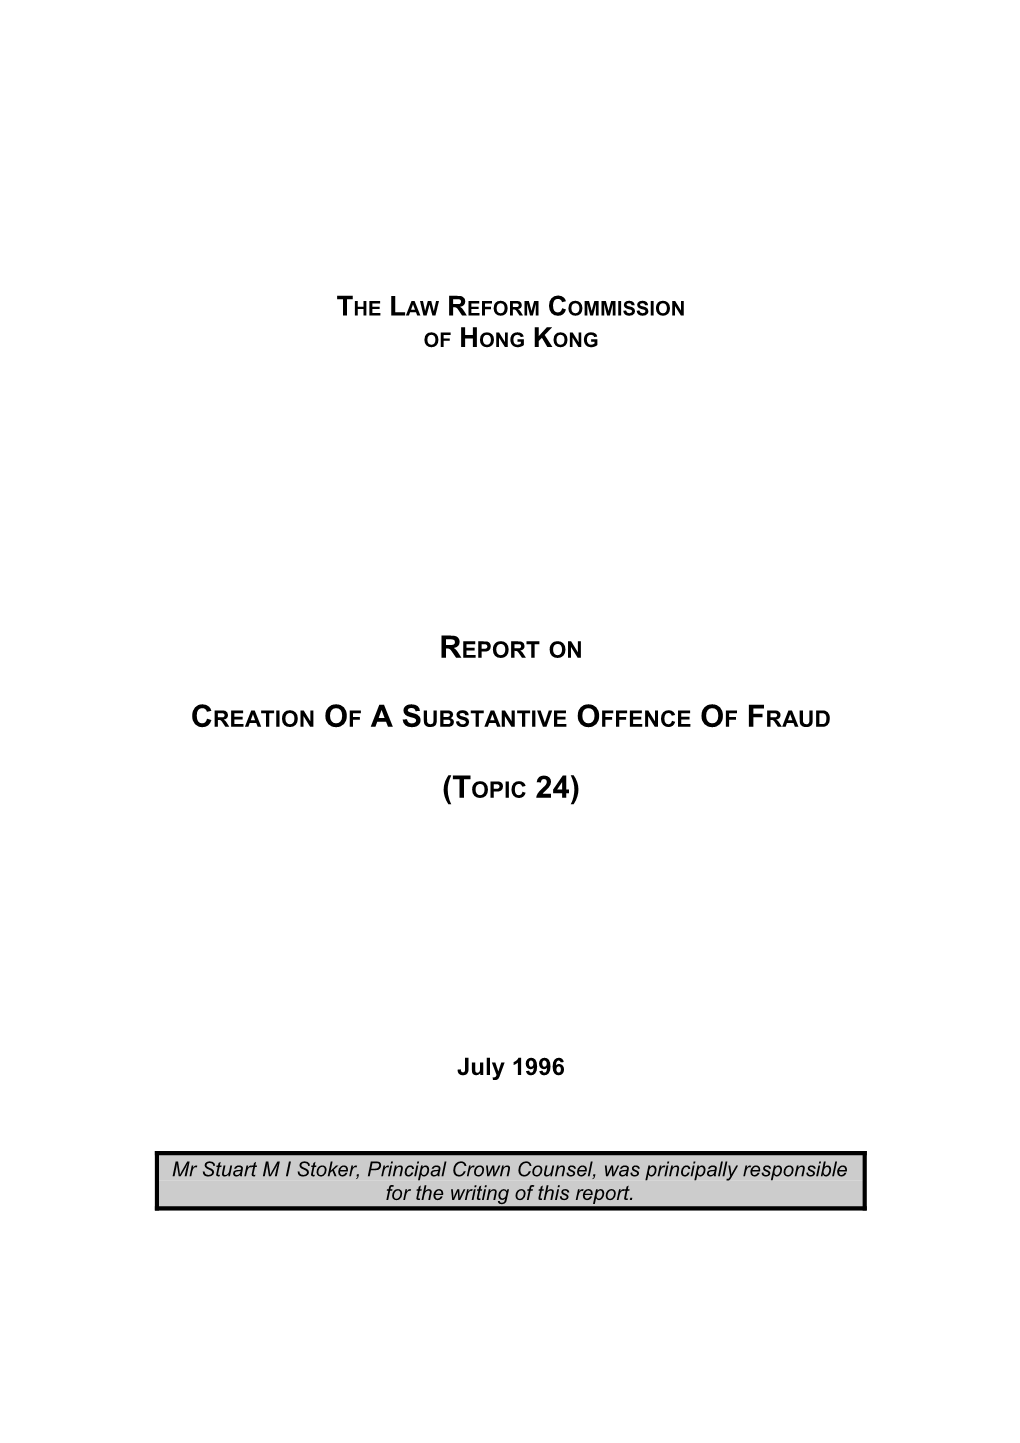 The Law Reform Commission s1